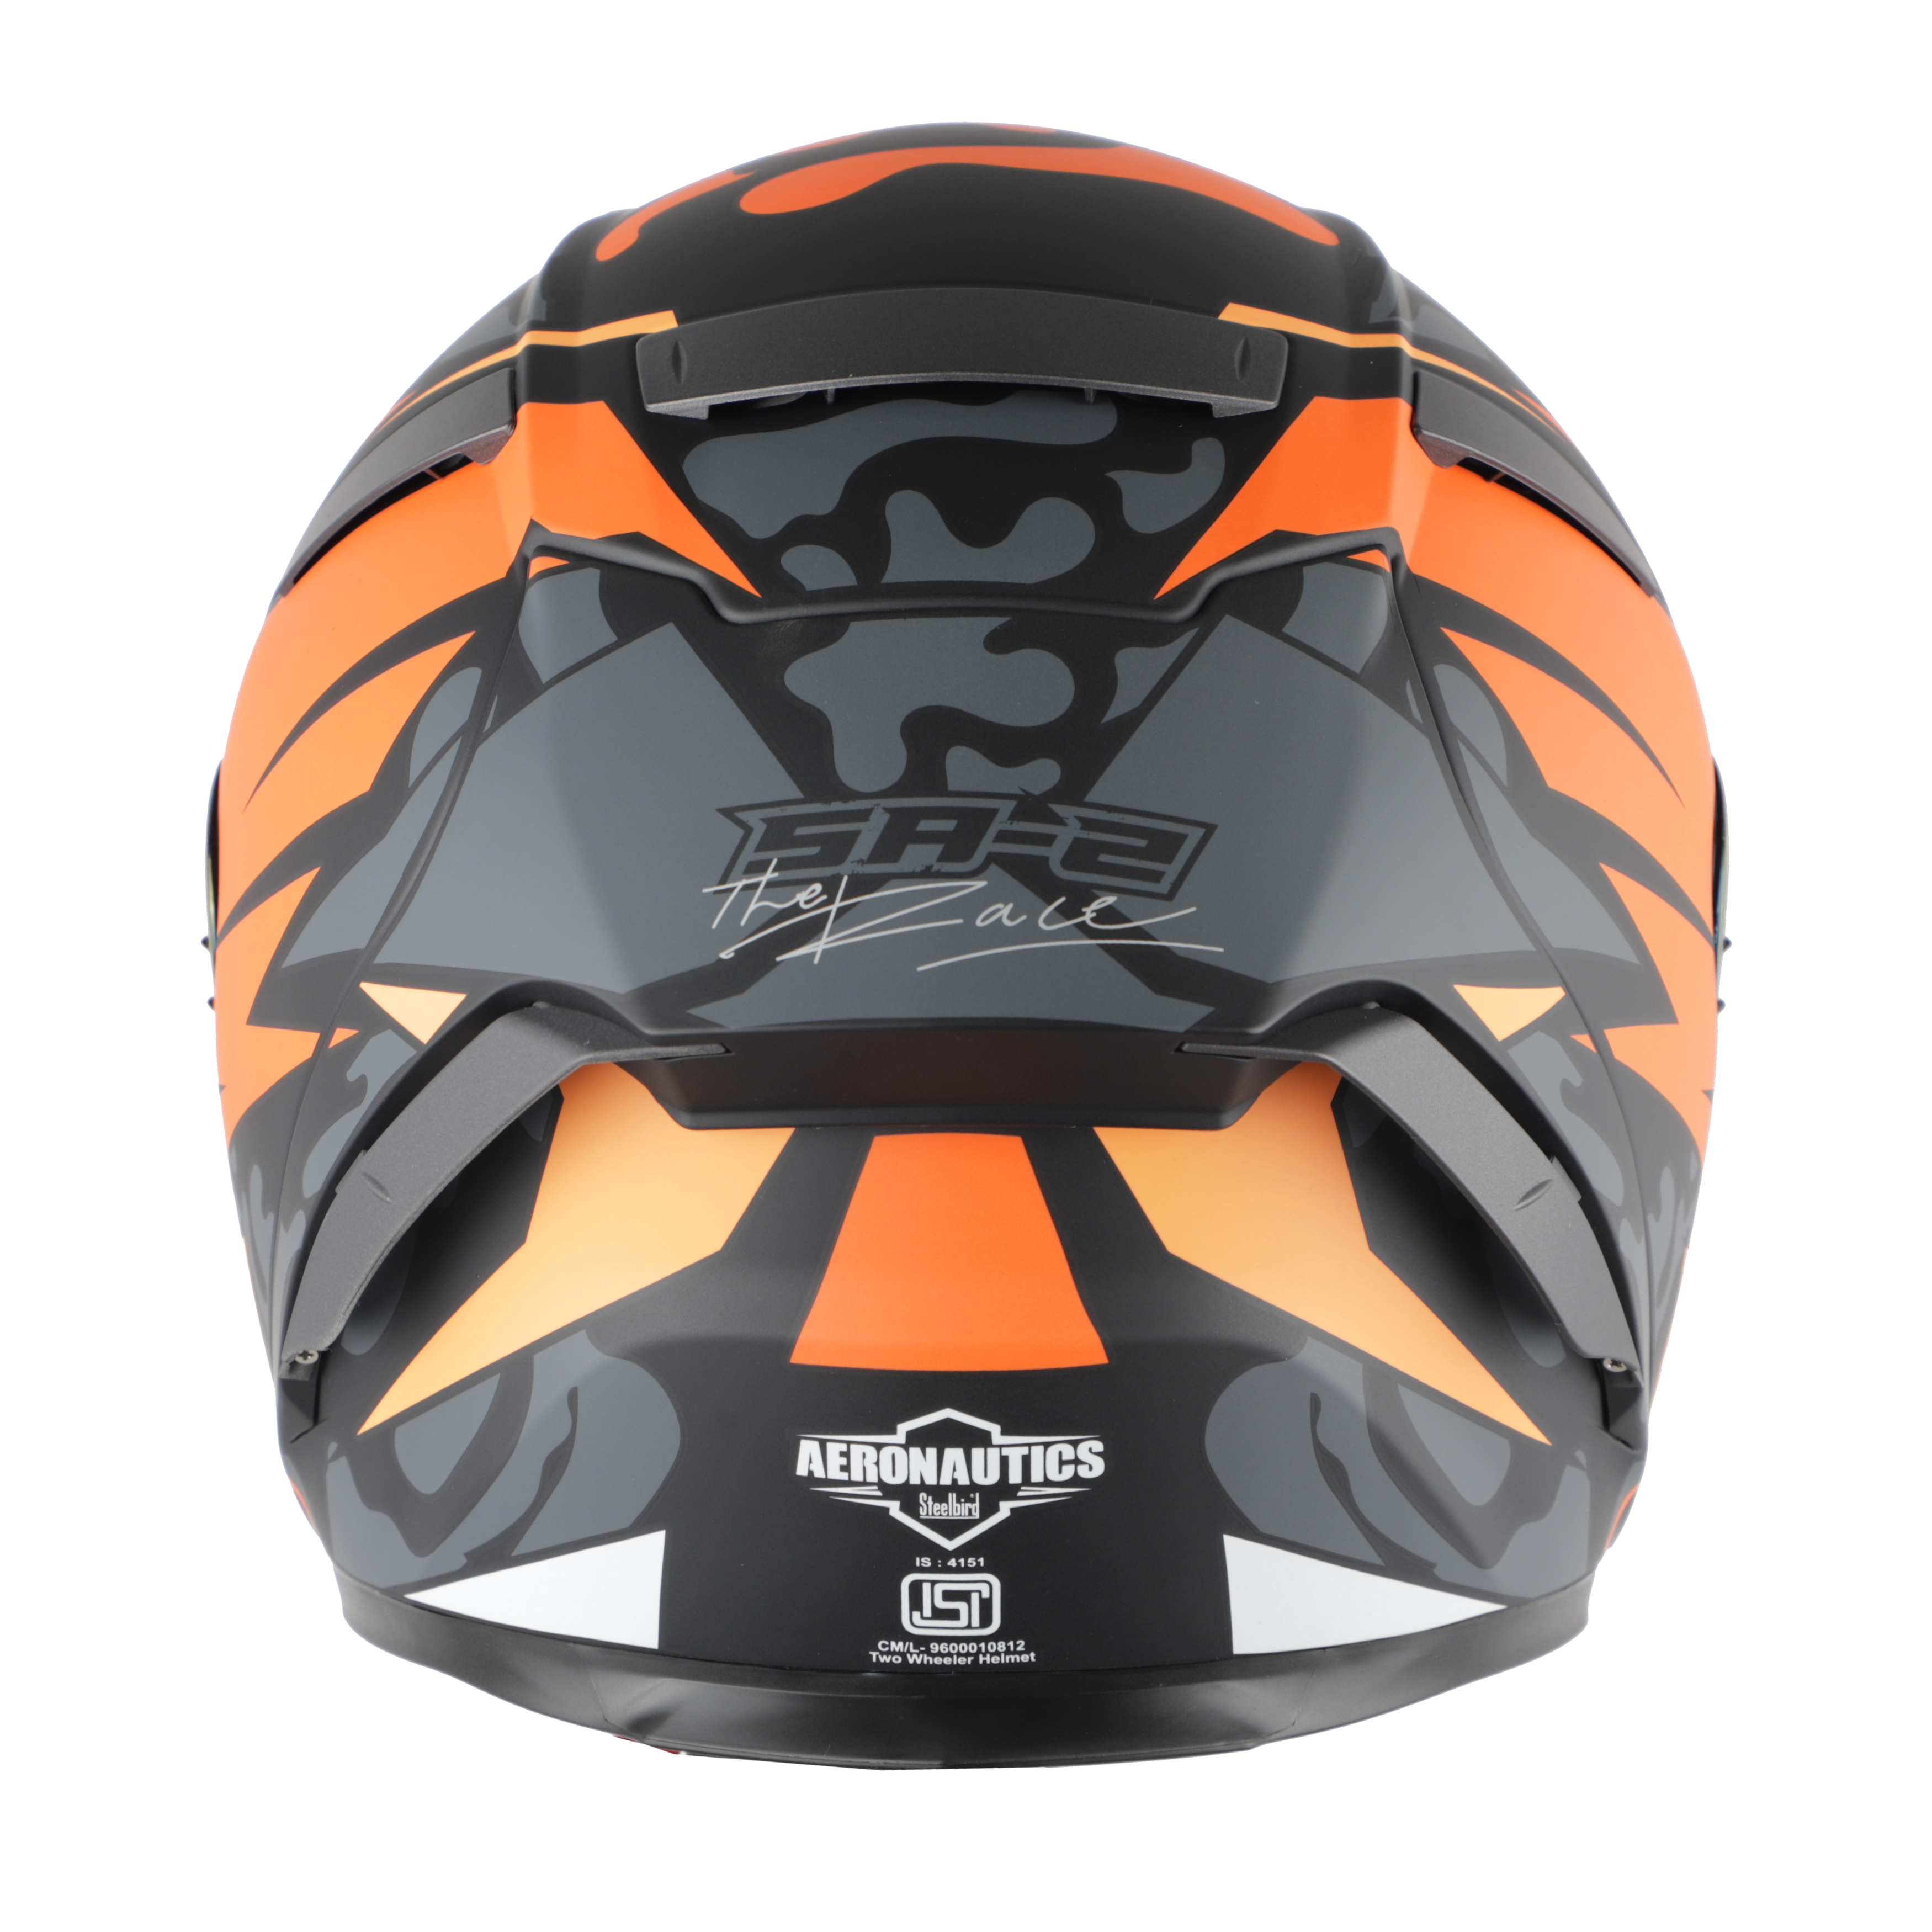 SA-2 TERMINATOR 3.0 MAT BLACK WITH ORANGE FITTED WITH CLEAR VISOR EXTRA RAINBOW CHROME VISOR FREE (WITH ANTI-FOR SHIELD HOLDER)